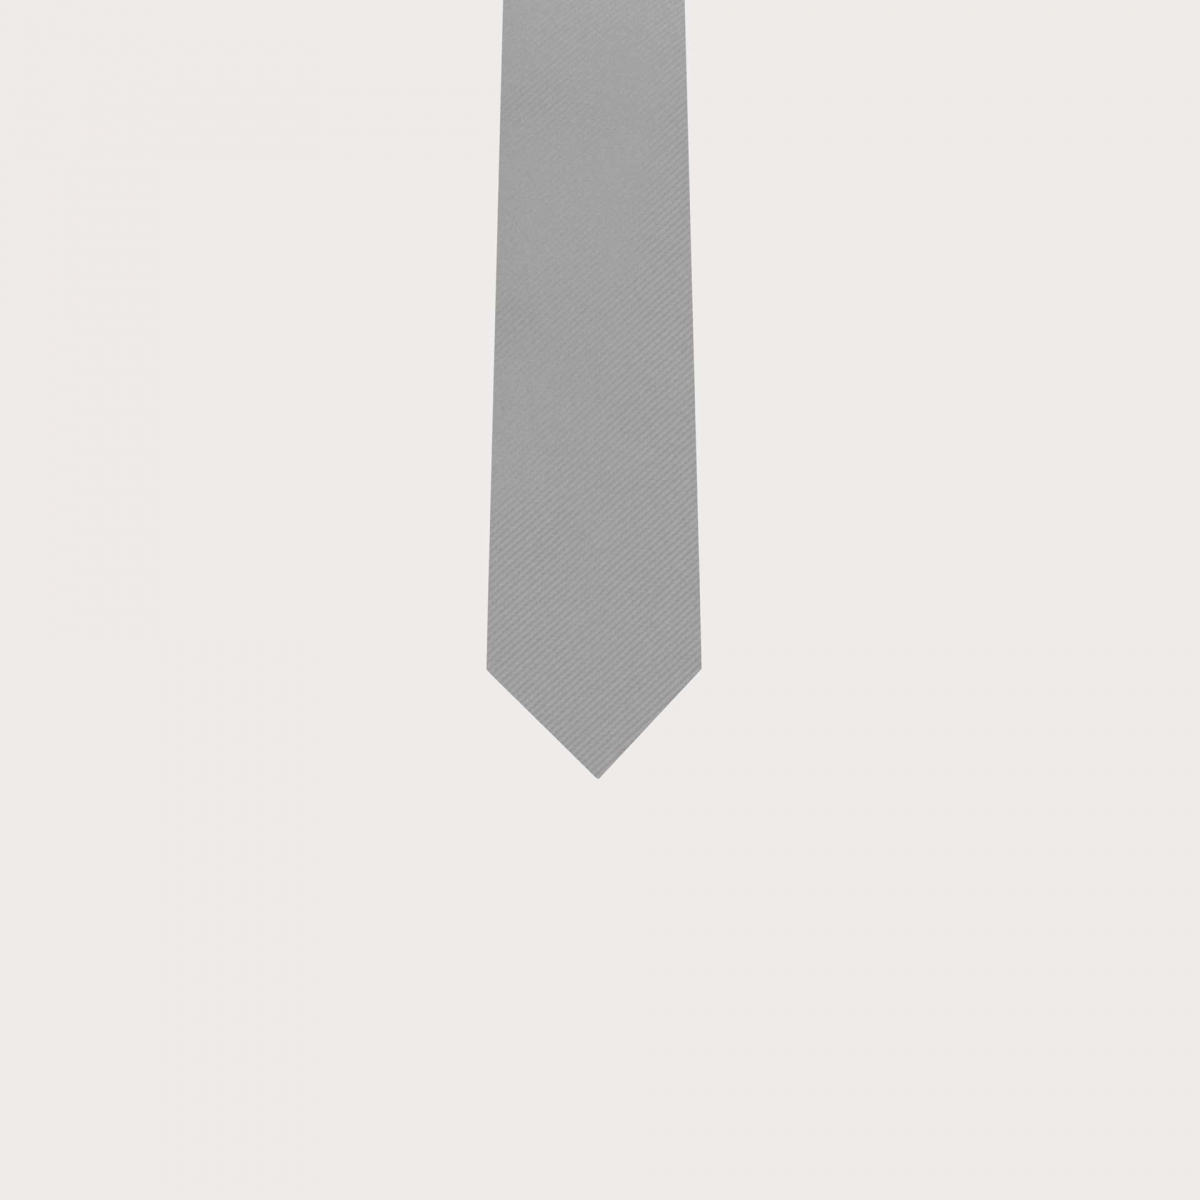 BRUCLE Grey silk tie for children and teenagers